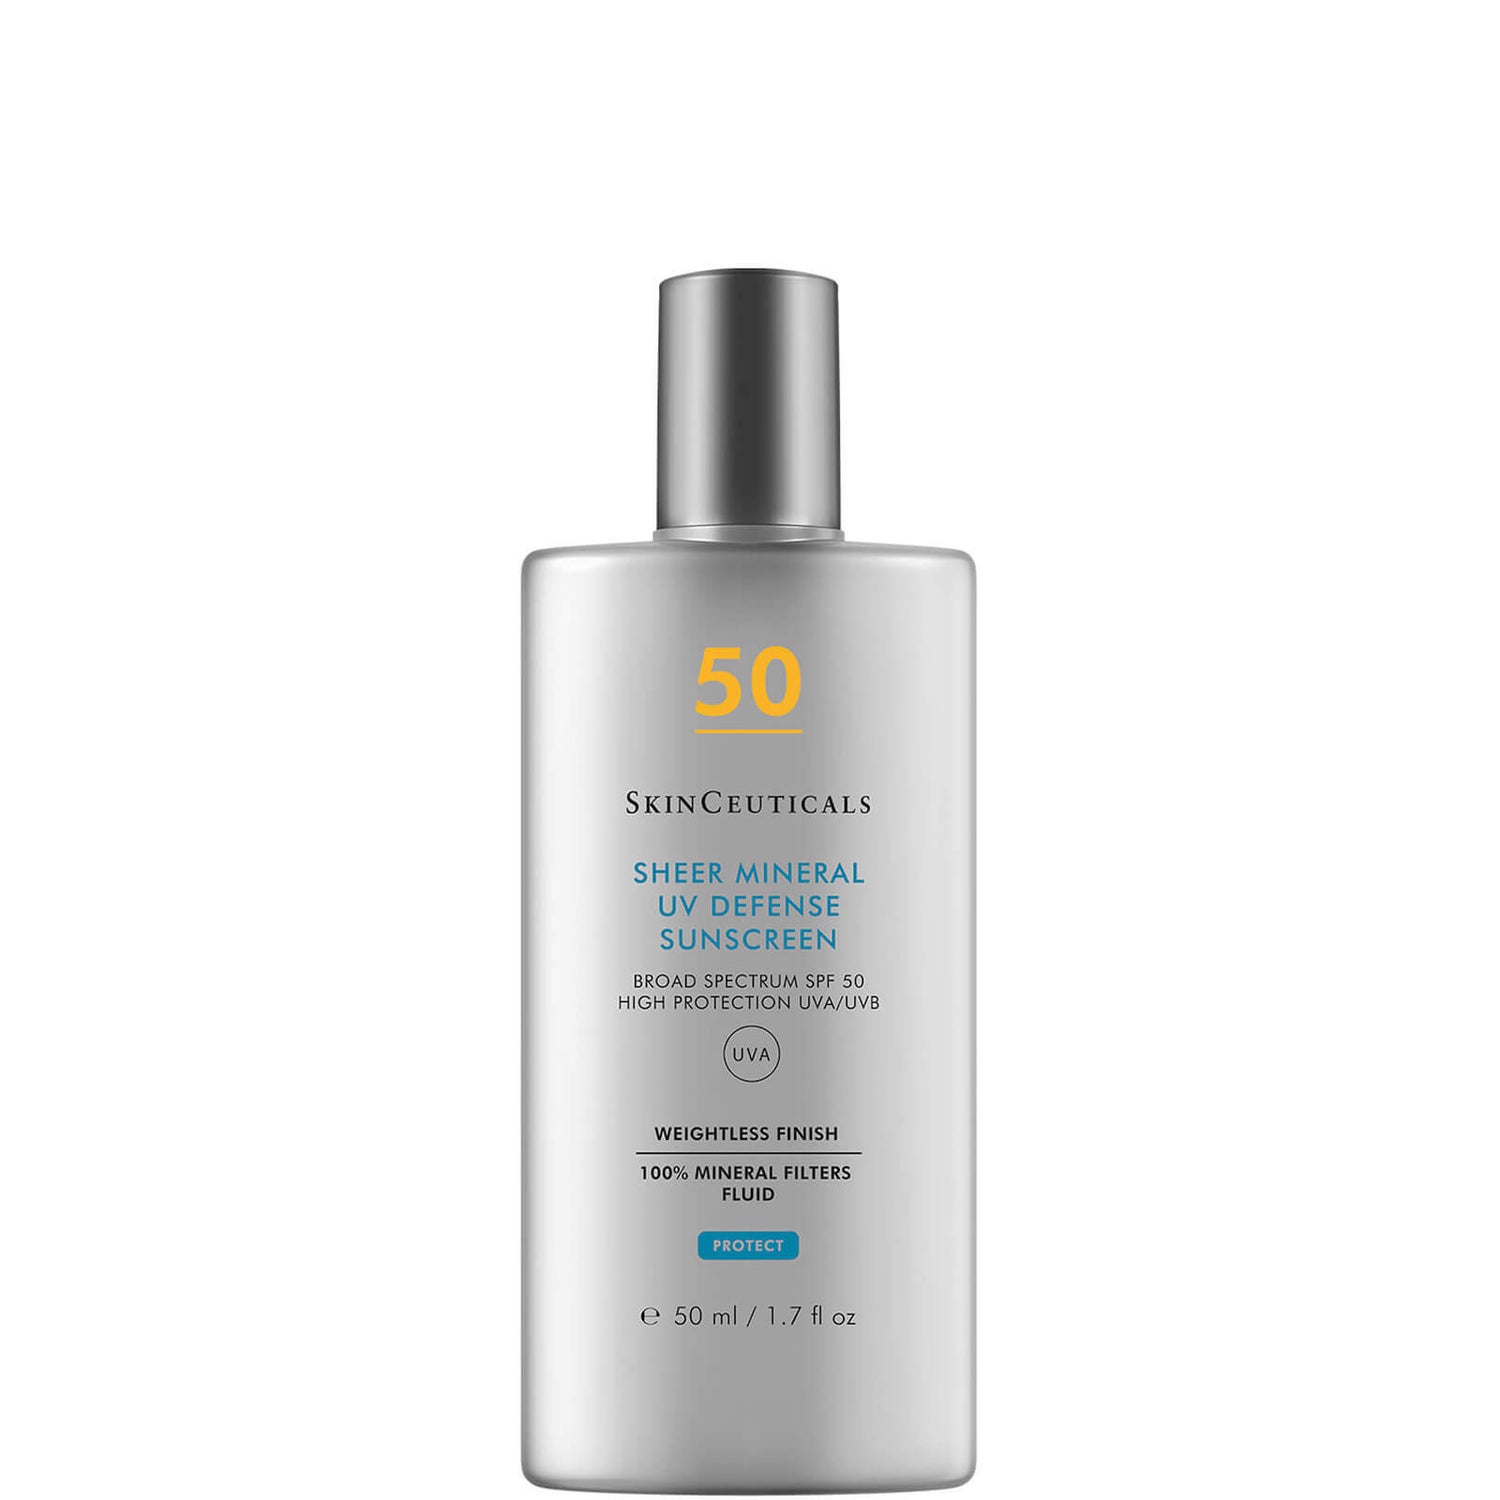 SkinCeuticals Sheer Mineral UV Defense SPF50 Sunscreen Protection 50 ml